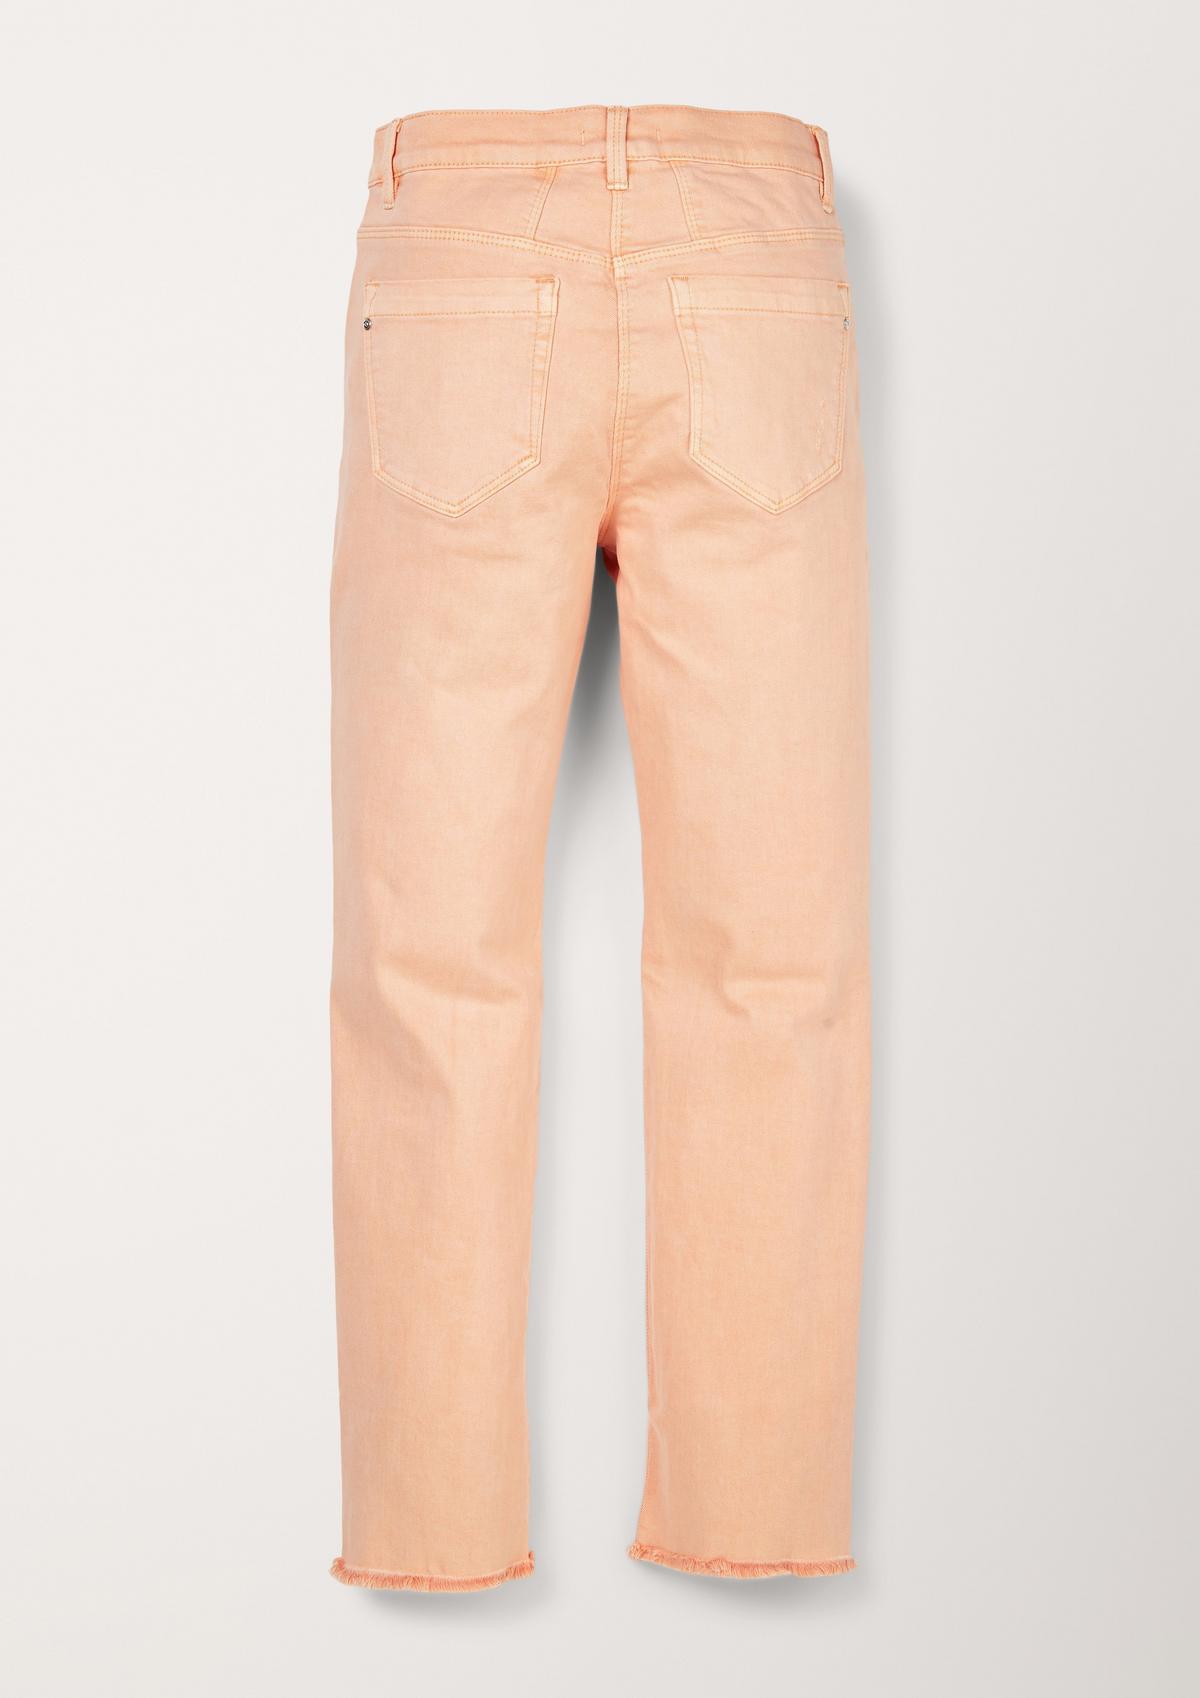 s.Oliver Jeans with frayed hems